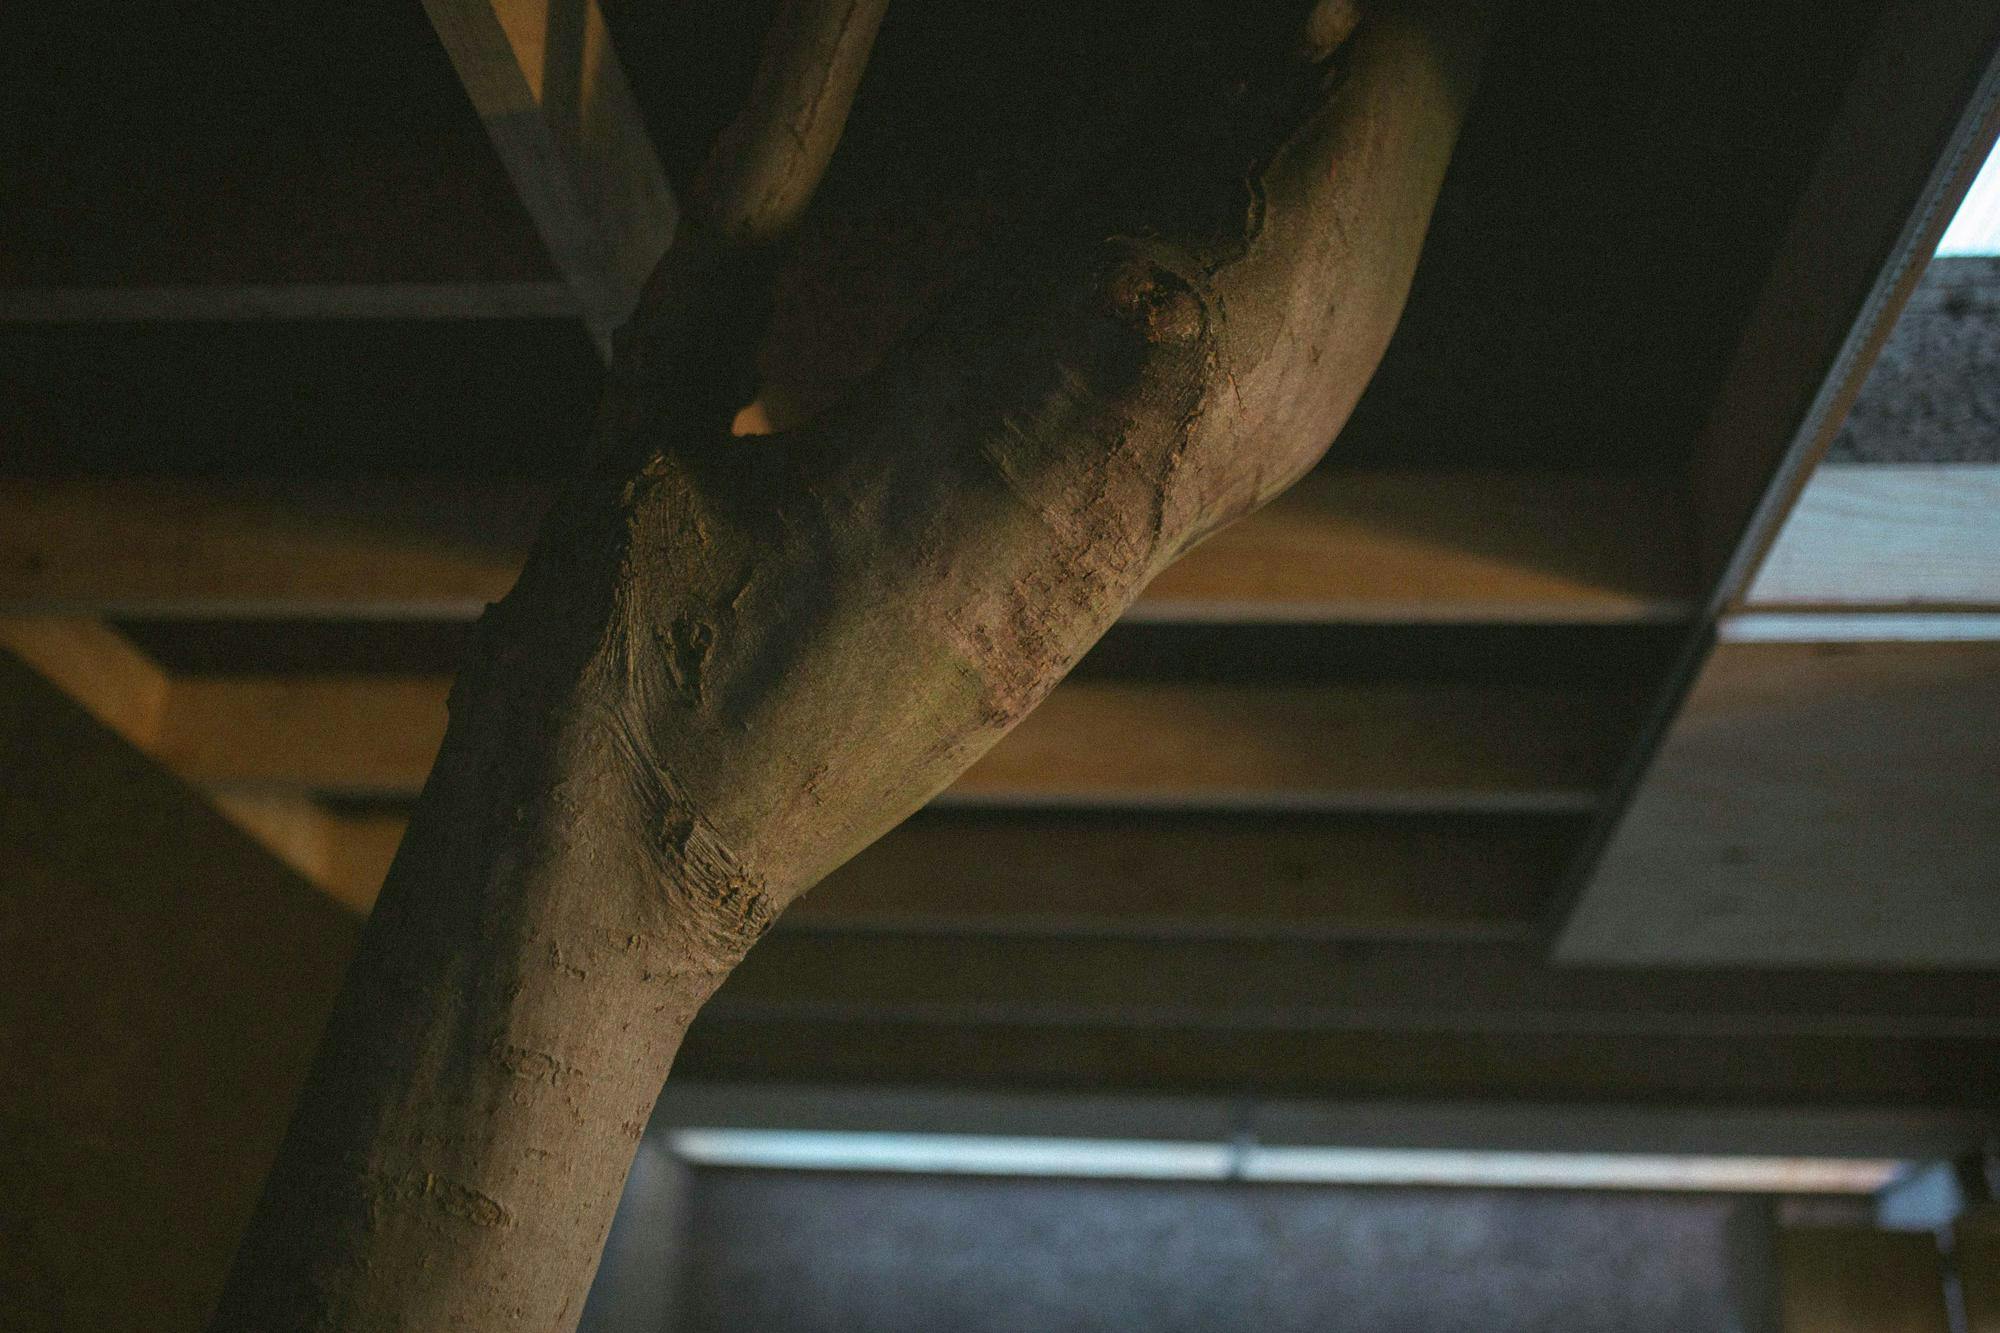 Photograph of a tree branch within the studio as it punctures through the roof